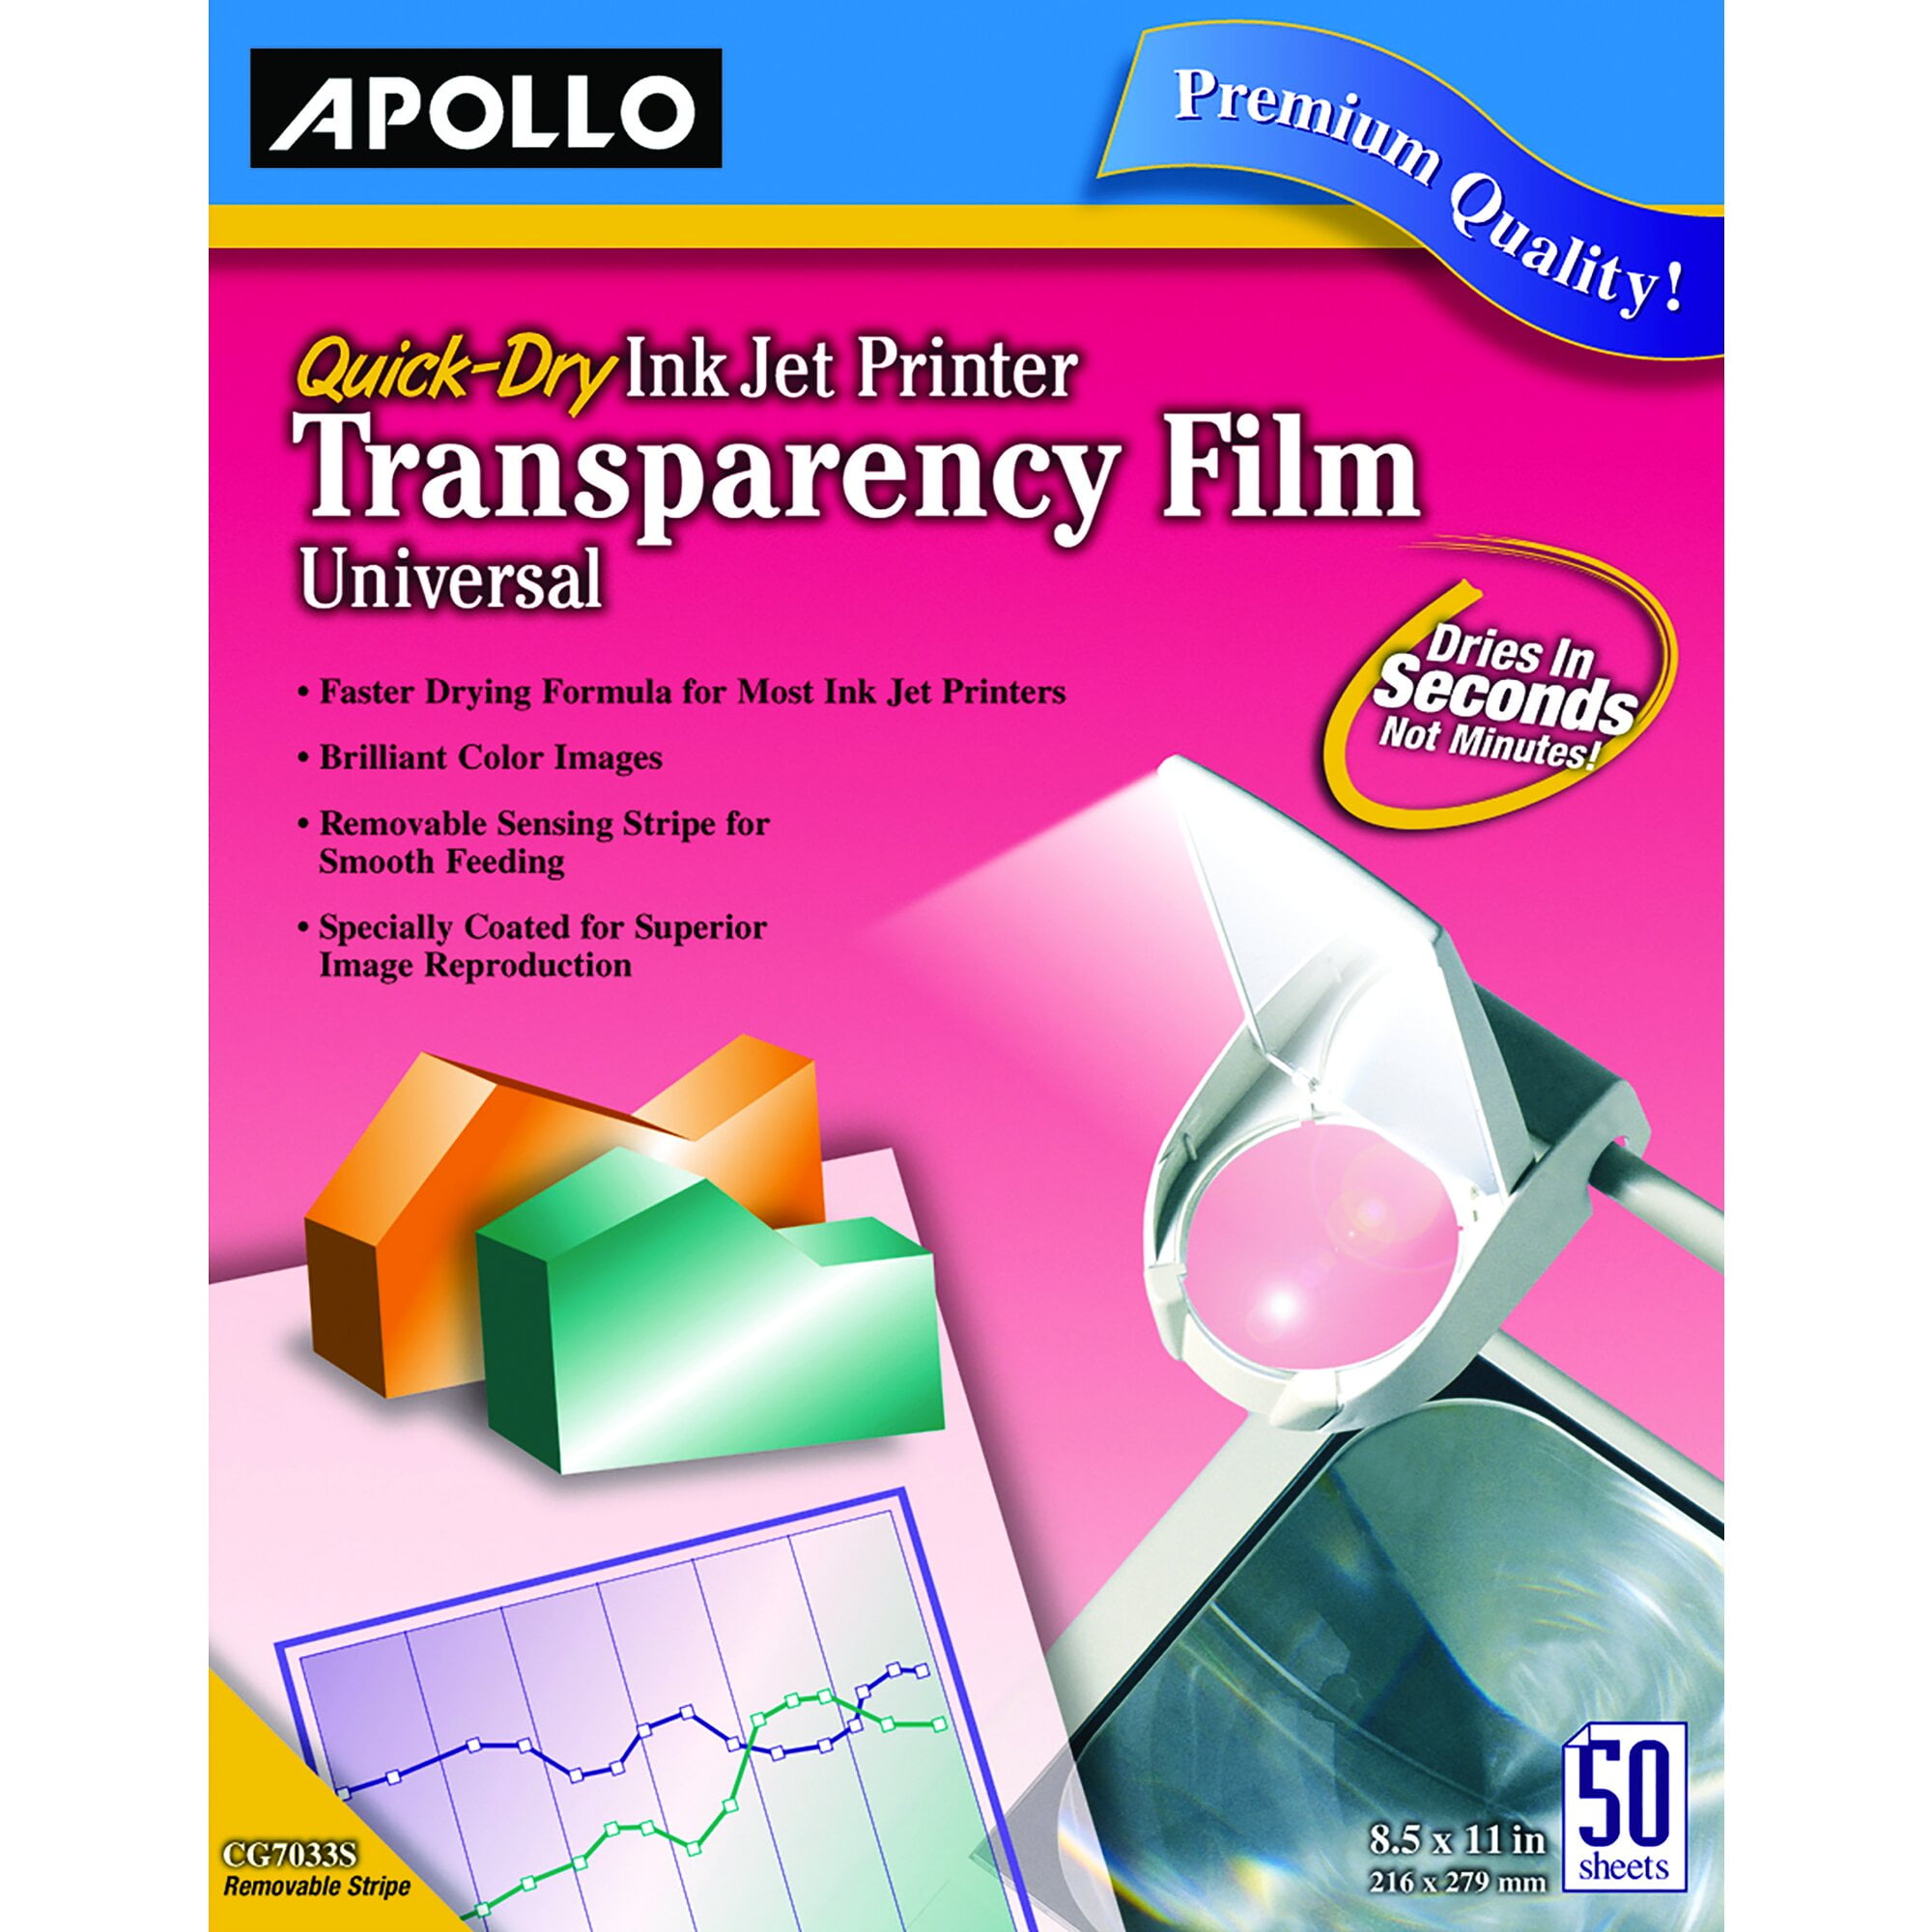 Vintage Apollo Transparency Film Color Rainbow Pack 100 Sheets 8 1/2 X 11 New 